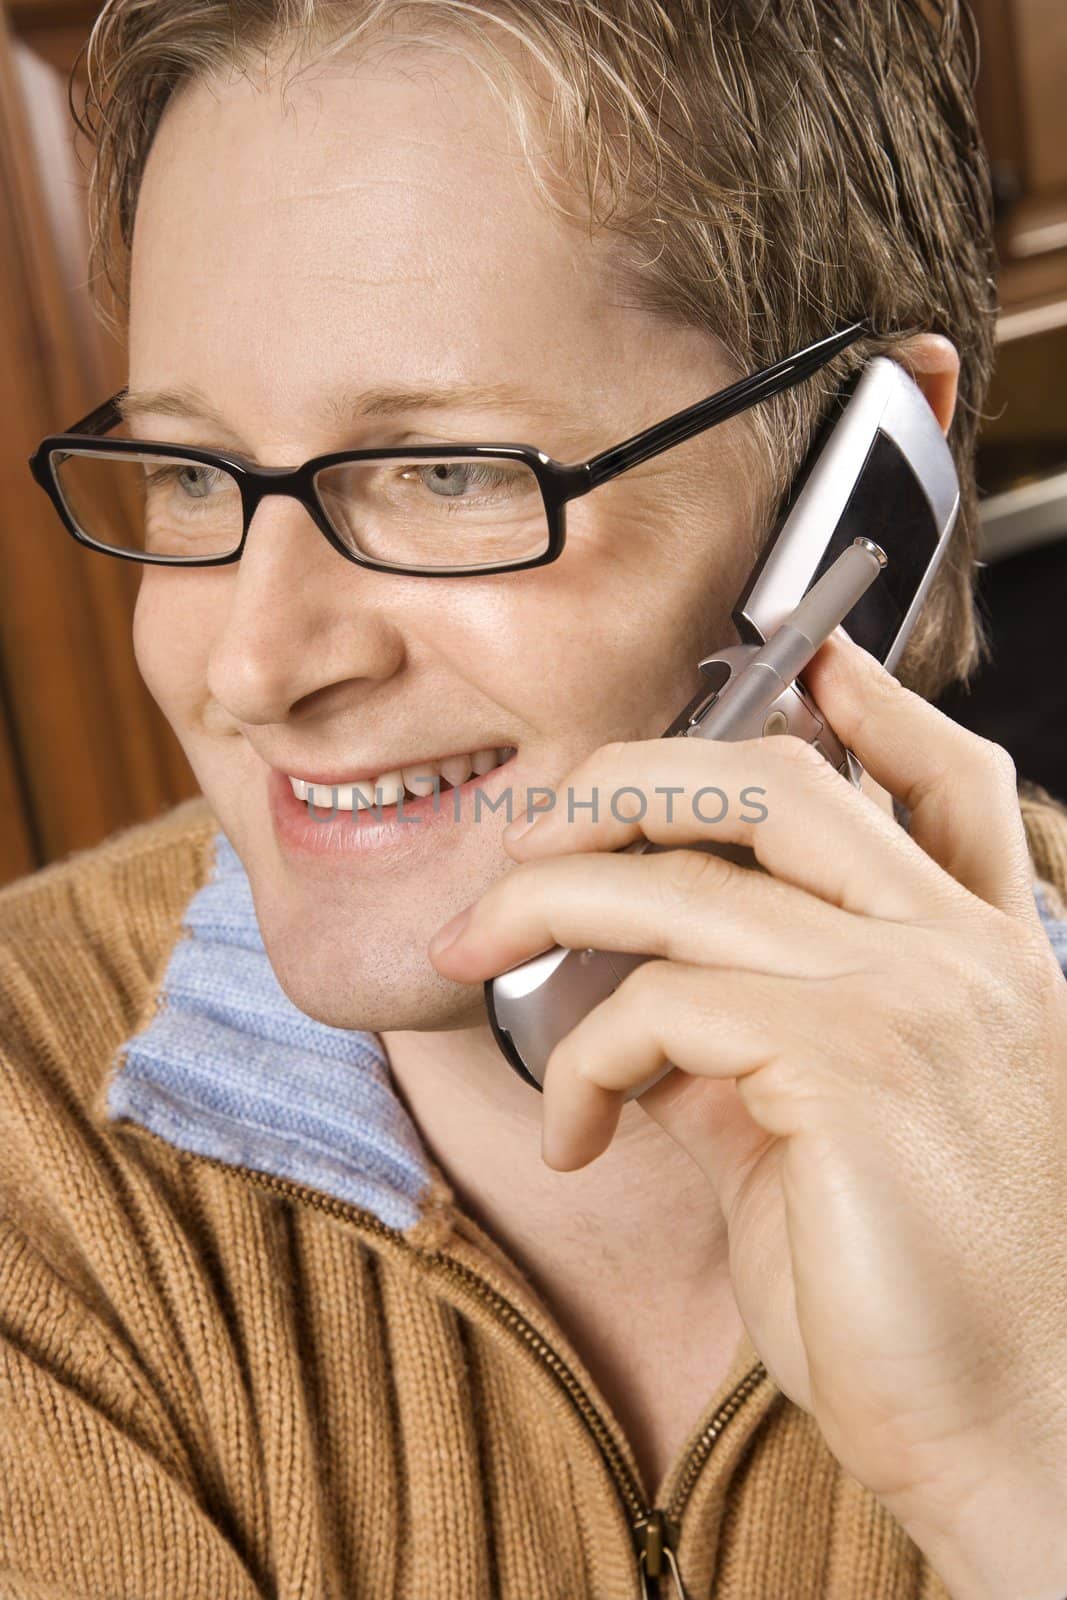 Caucasian man smiling and talking on cellphone.